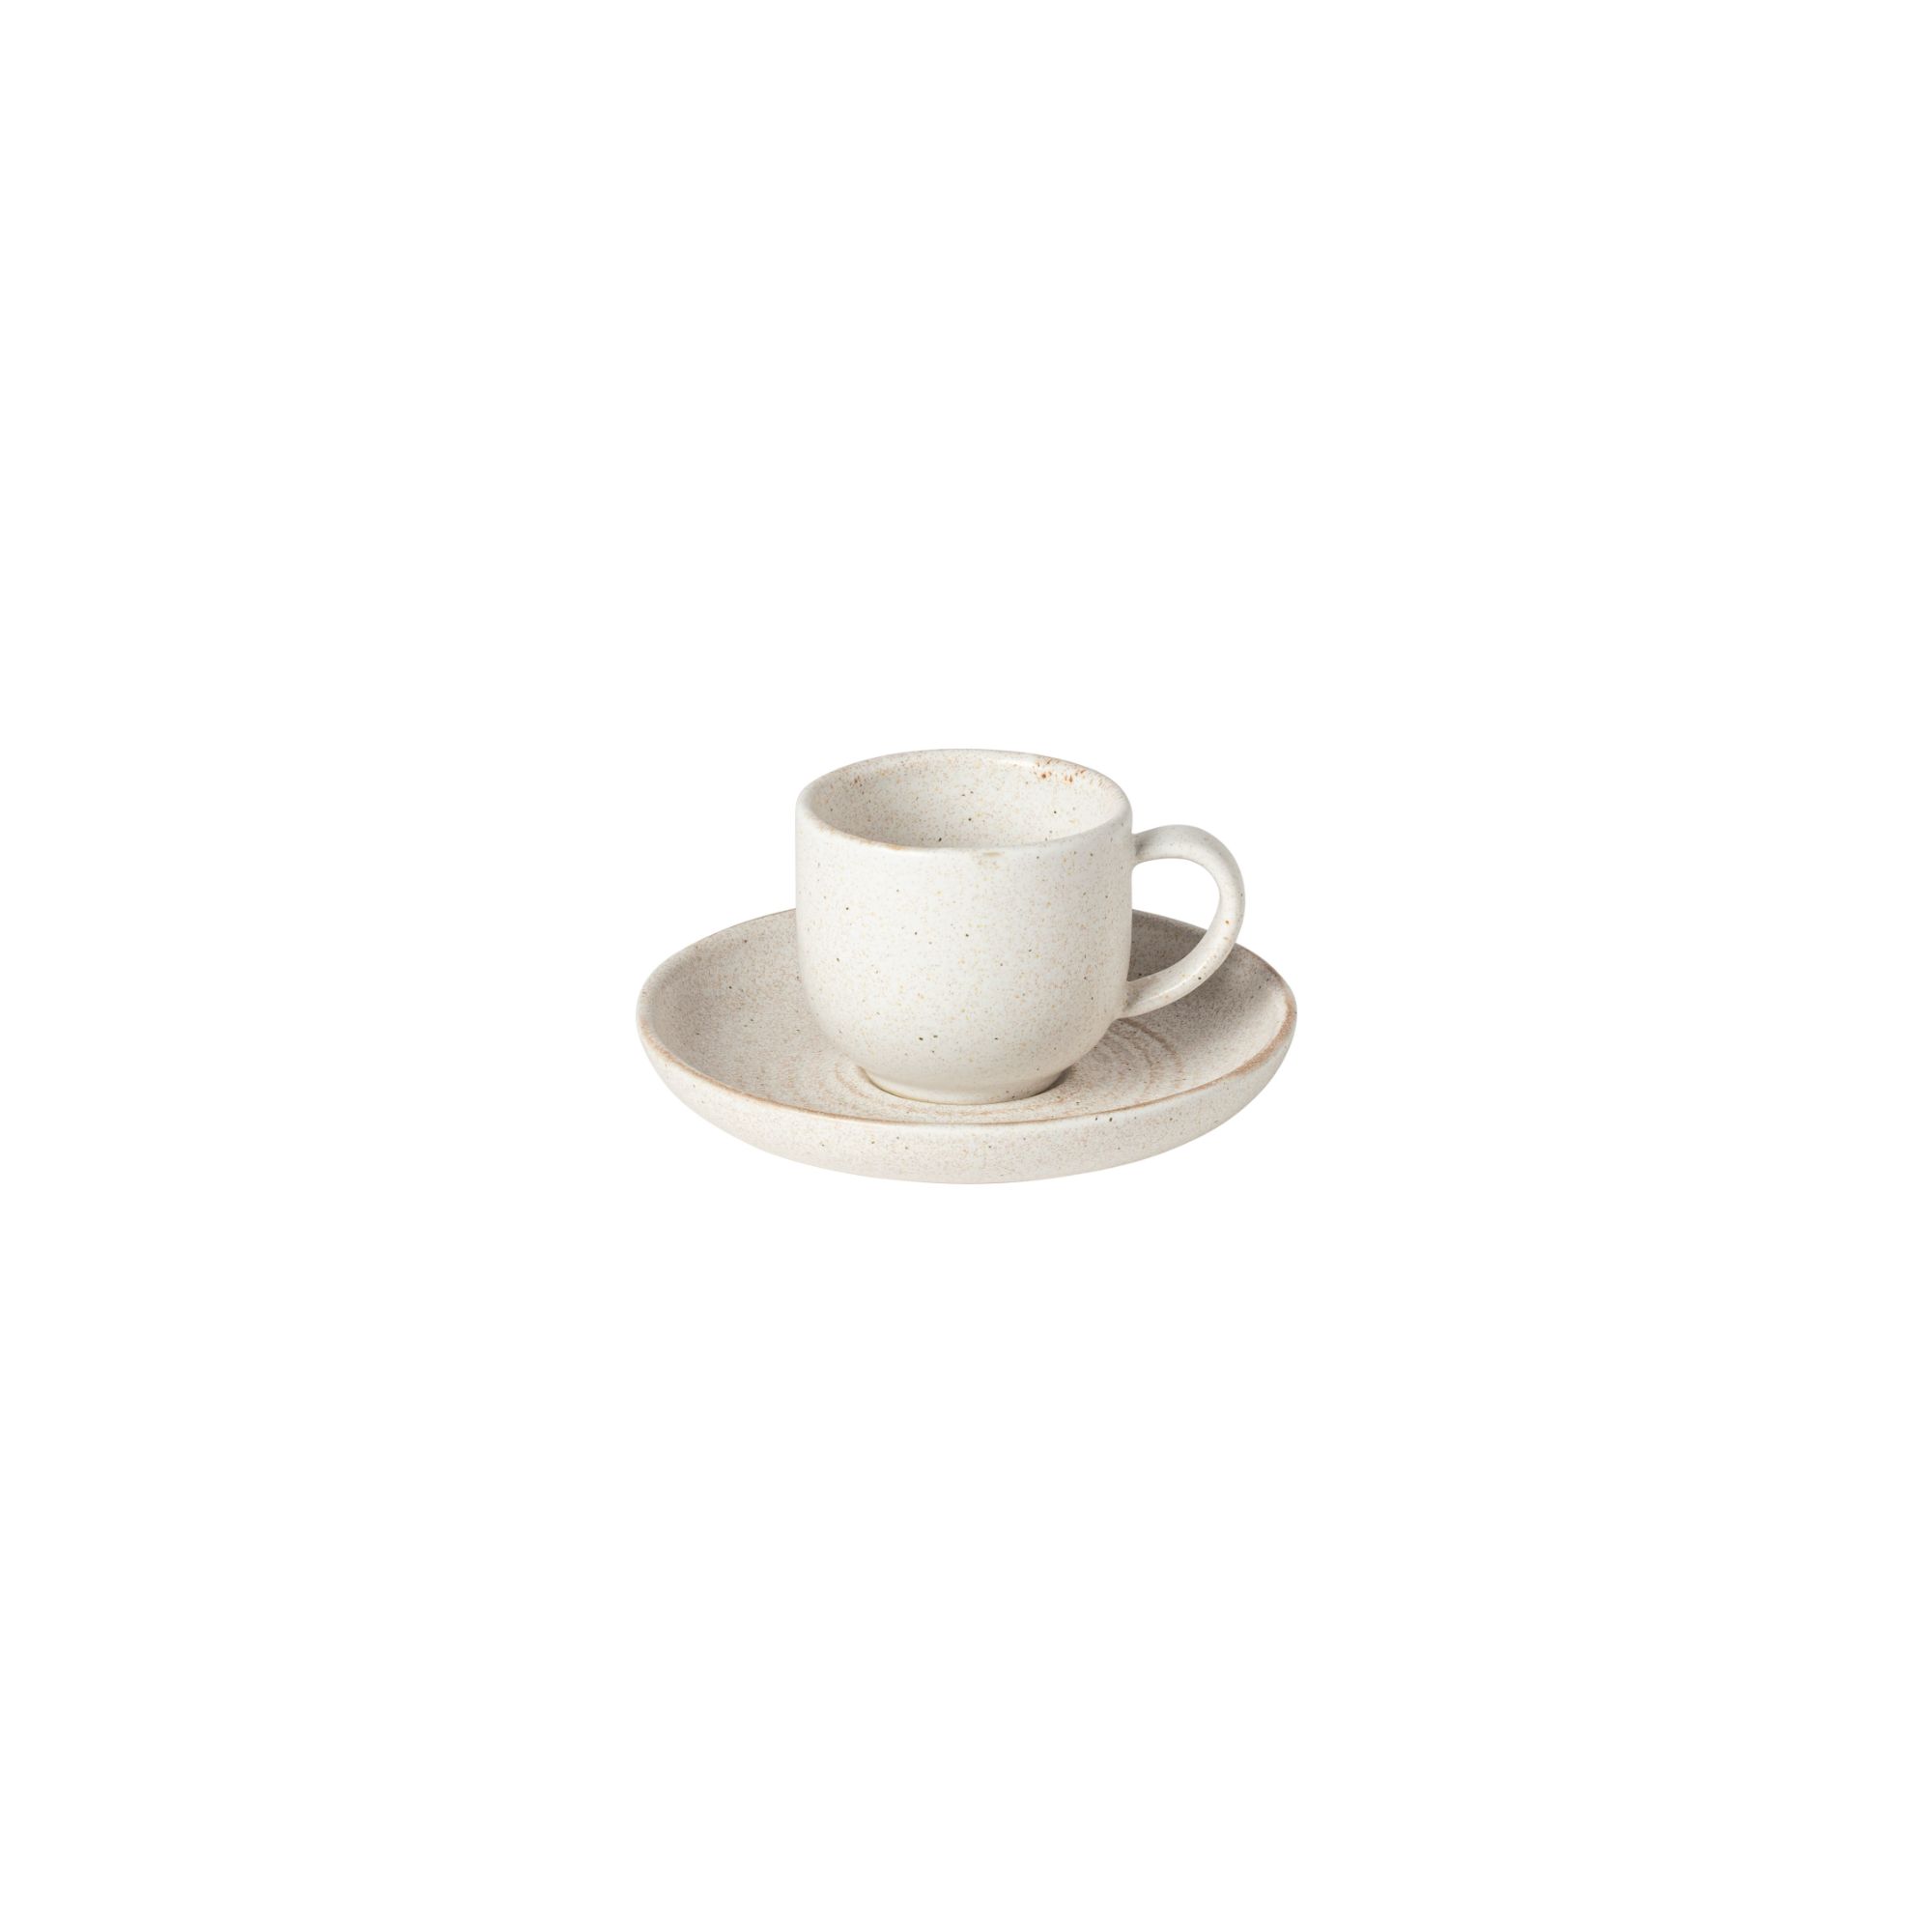 Vermont Cream Coffee Cup And Saucer 0.07l Gift